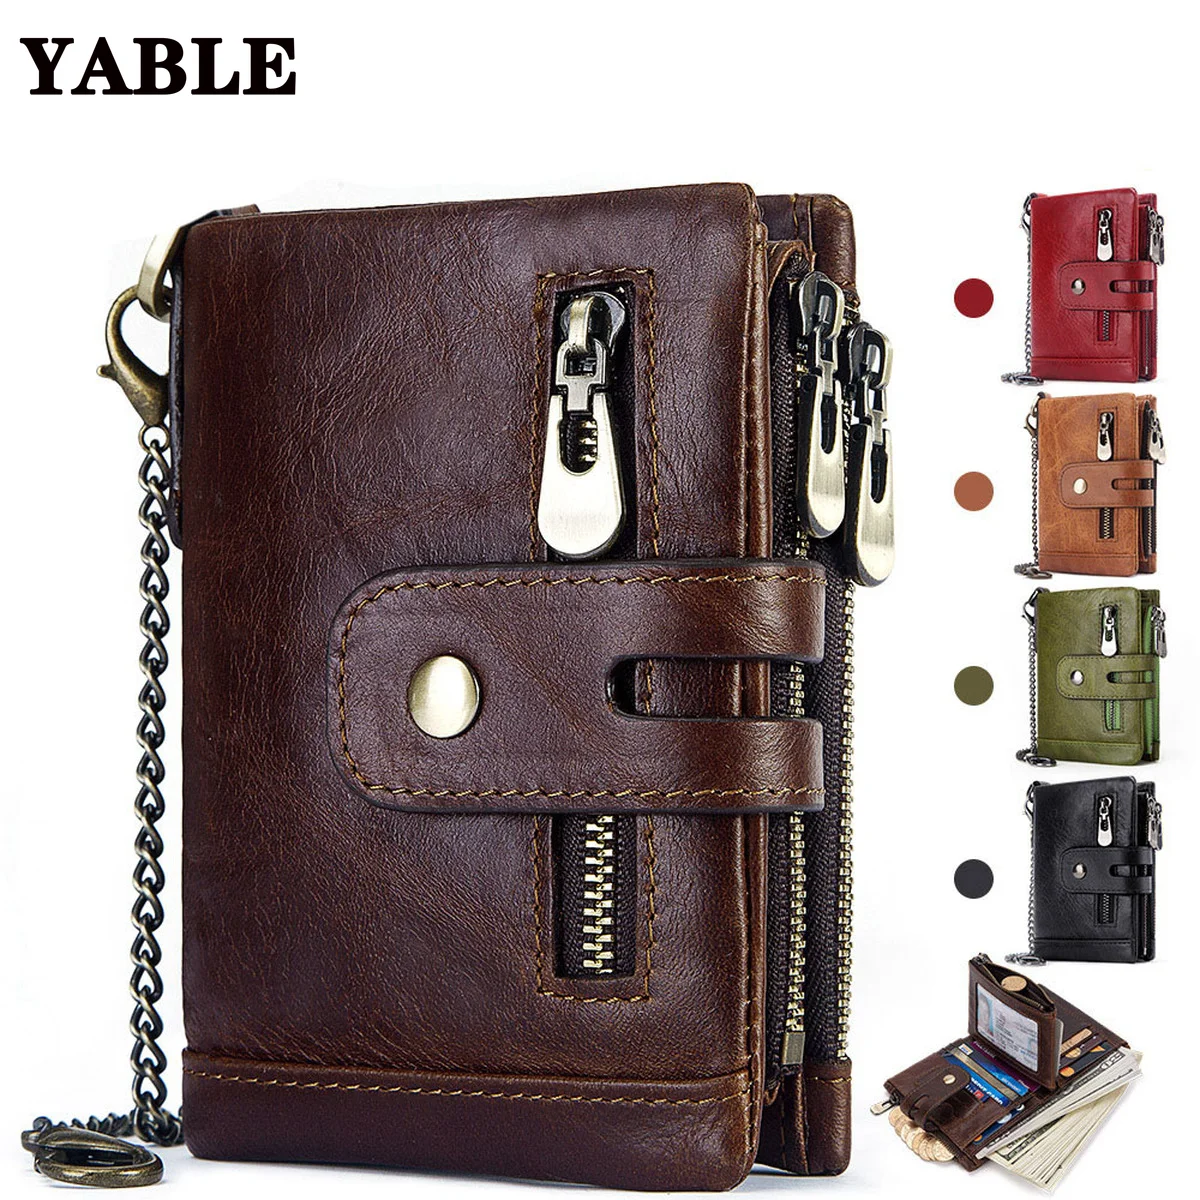 

Men's Wallet Wallet Leather RFID Swiping Leather Wallet Trifold Multiple Card Slots Crazy Horse Leather Coin Pocket Men's Bag